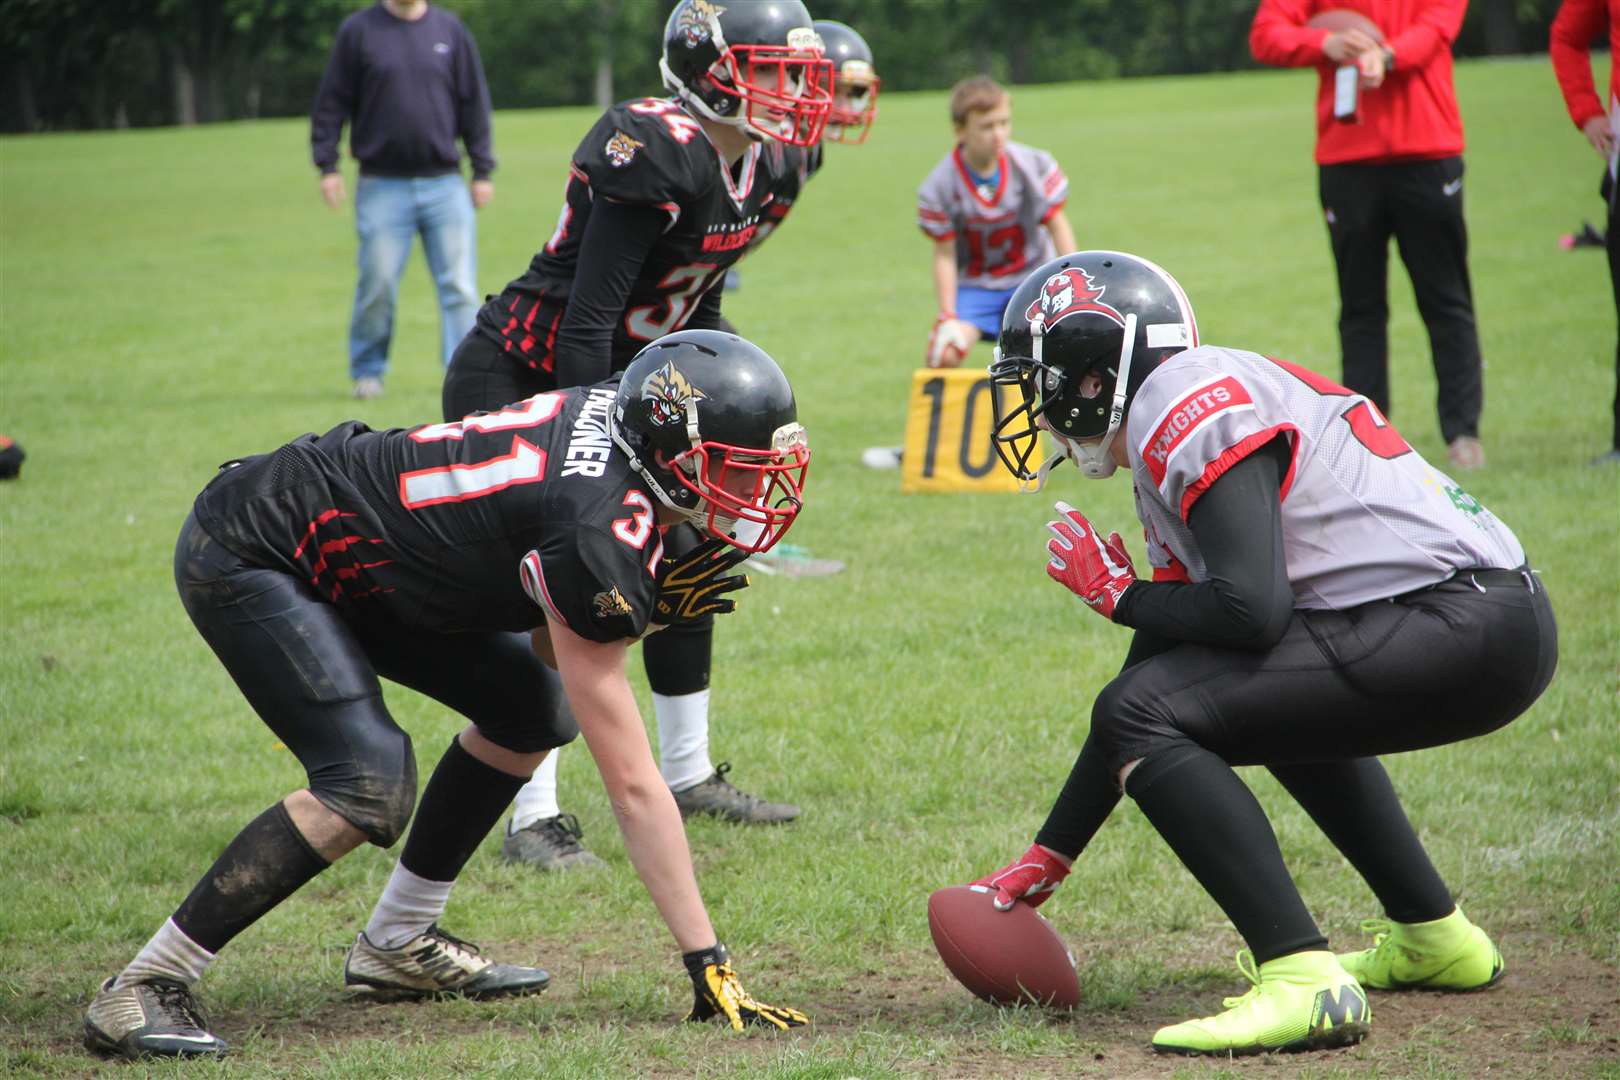 Highland Wildcats' youth team lost out to the Kent Exiles in the final of Britbowl. Picture: Anita Crant